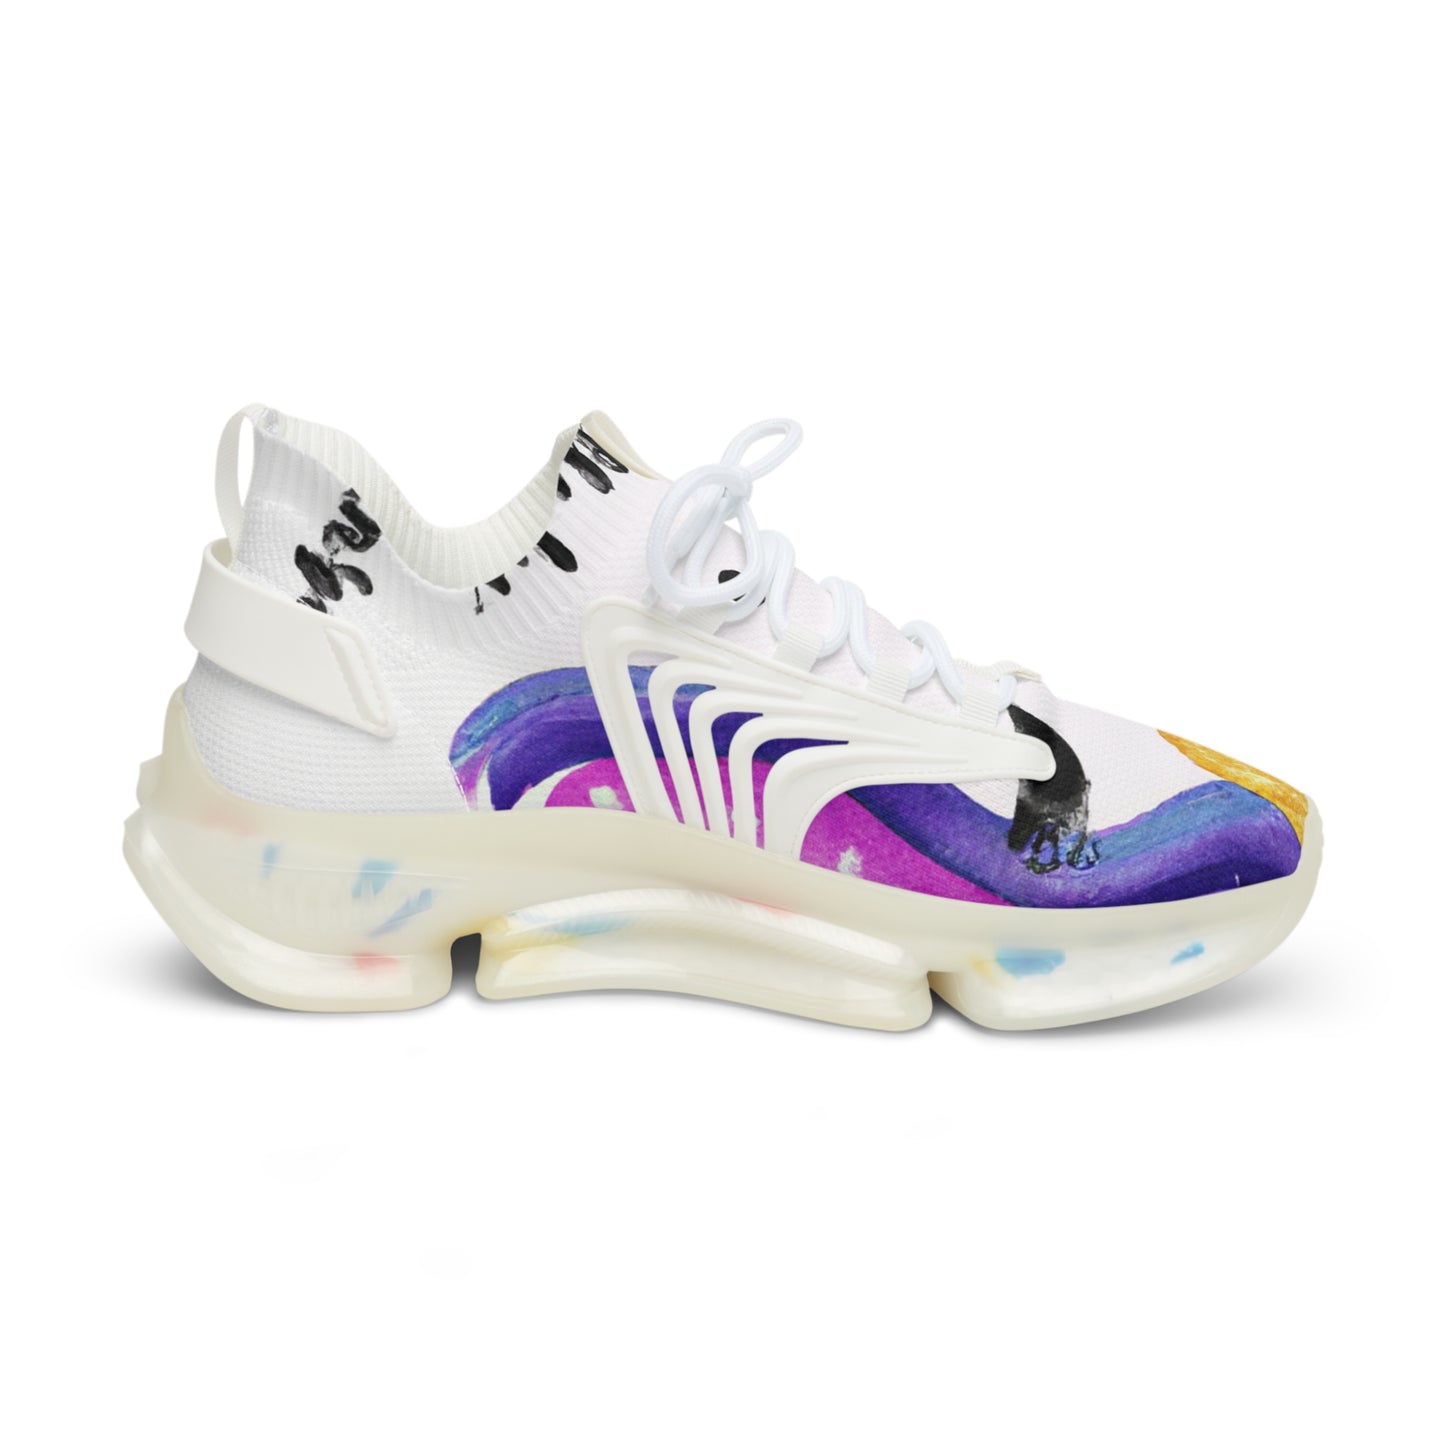 "Magical Stride: Whimsical Unicorn and Mythical Creature Inspired Sneakers" - Shoes Athletic Tennis Sneakers Sports Walking Shoes